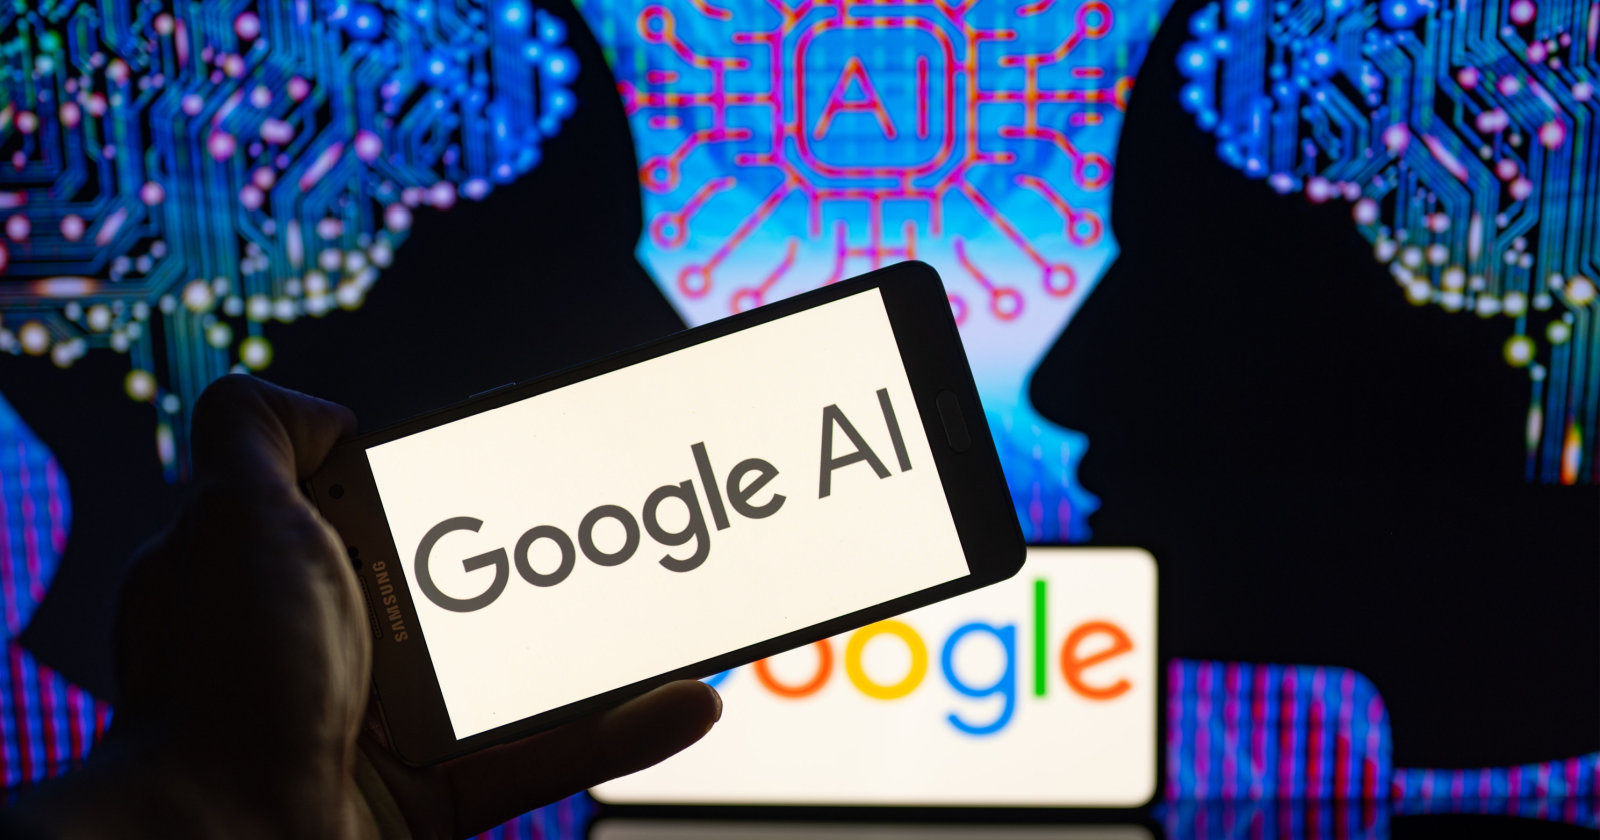 Google CEO Confirms AI Features Coming To Search "Soon"